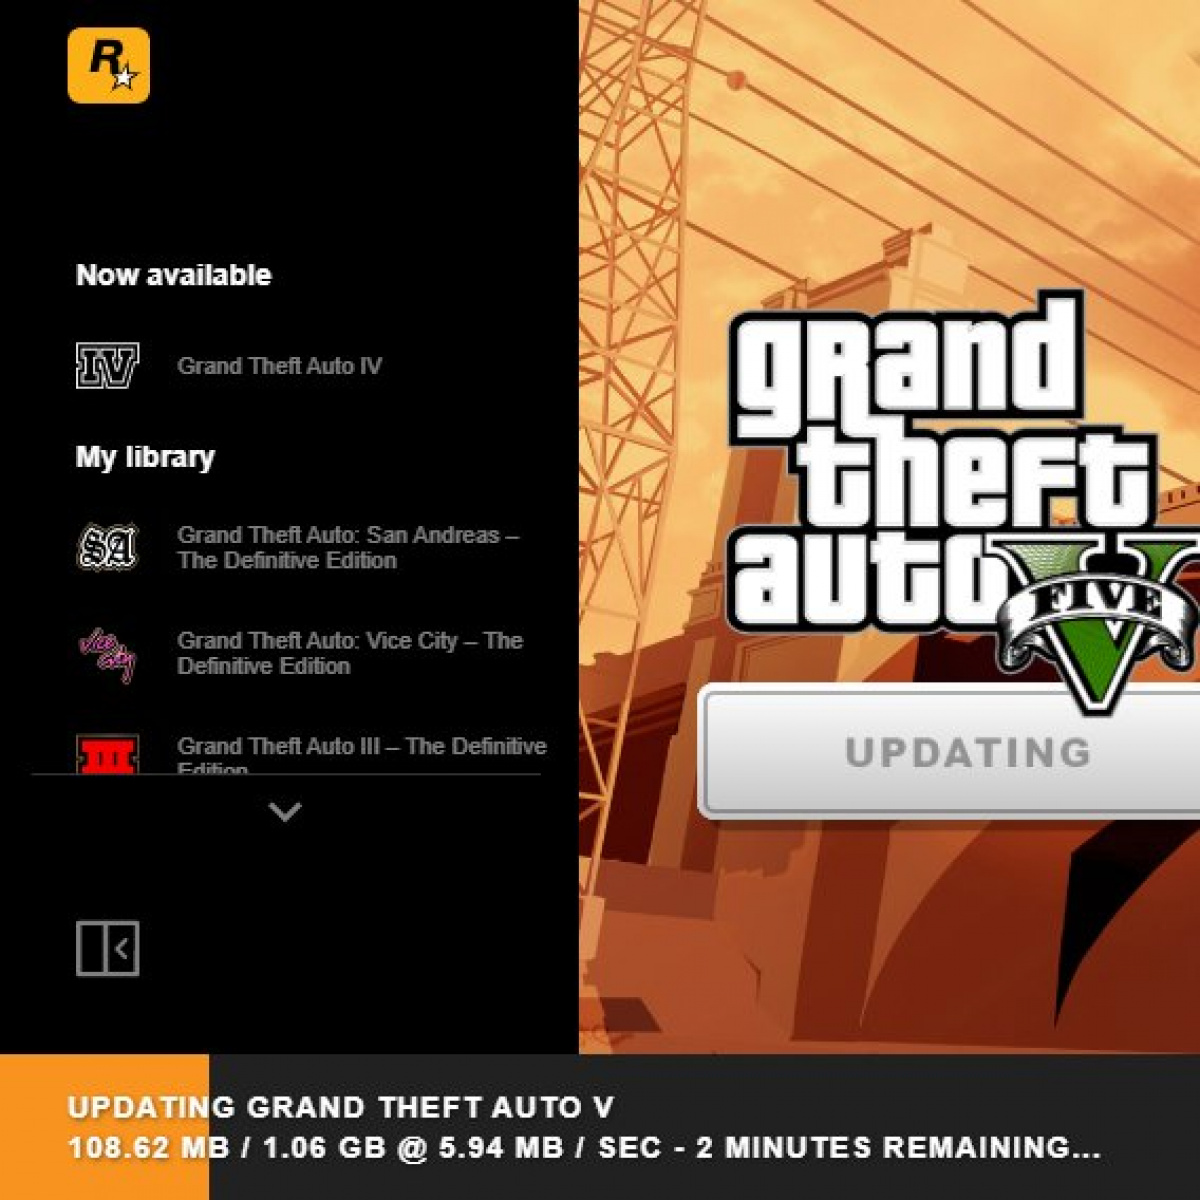 Rockstar Games Launcher Update Includes Strings Mentioning GTA